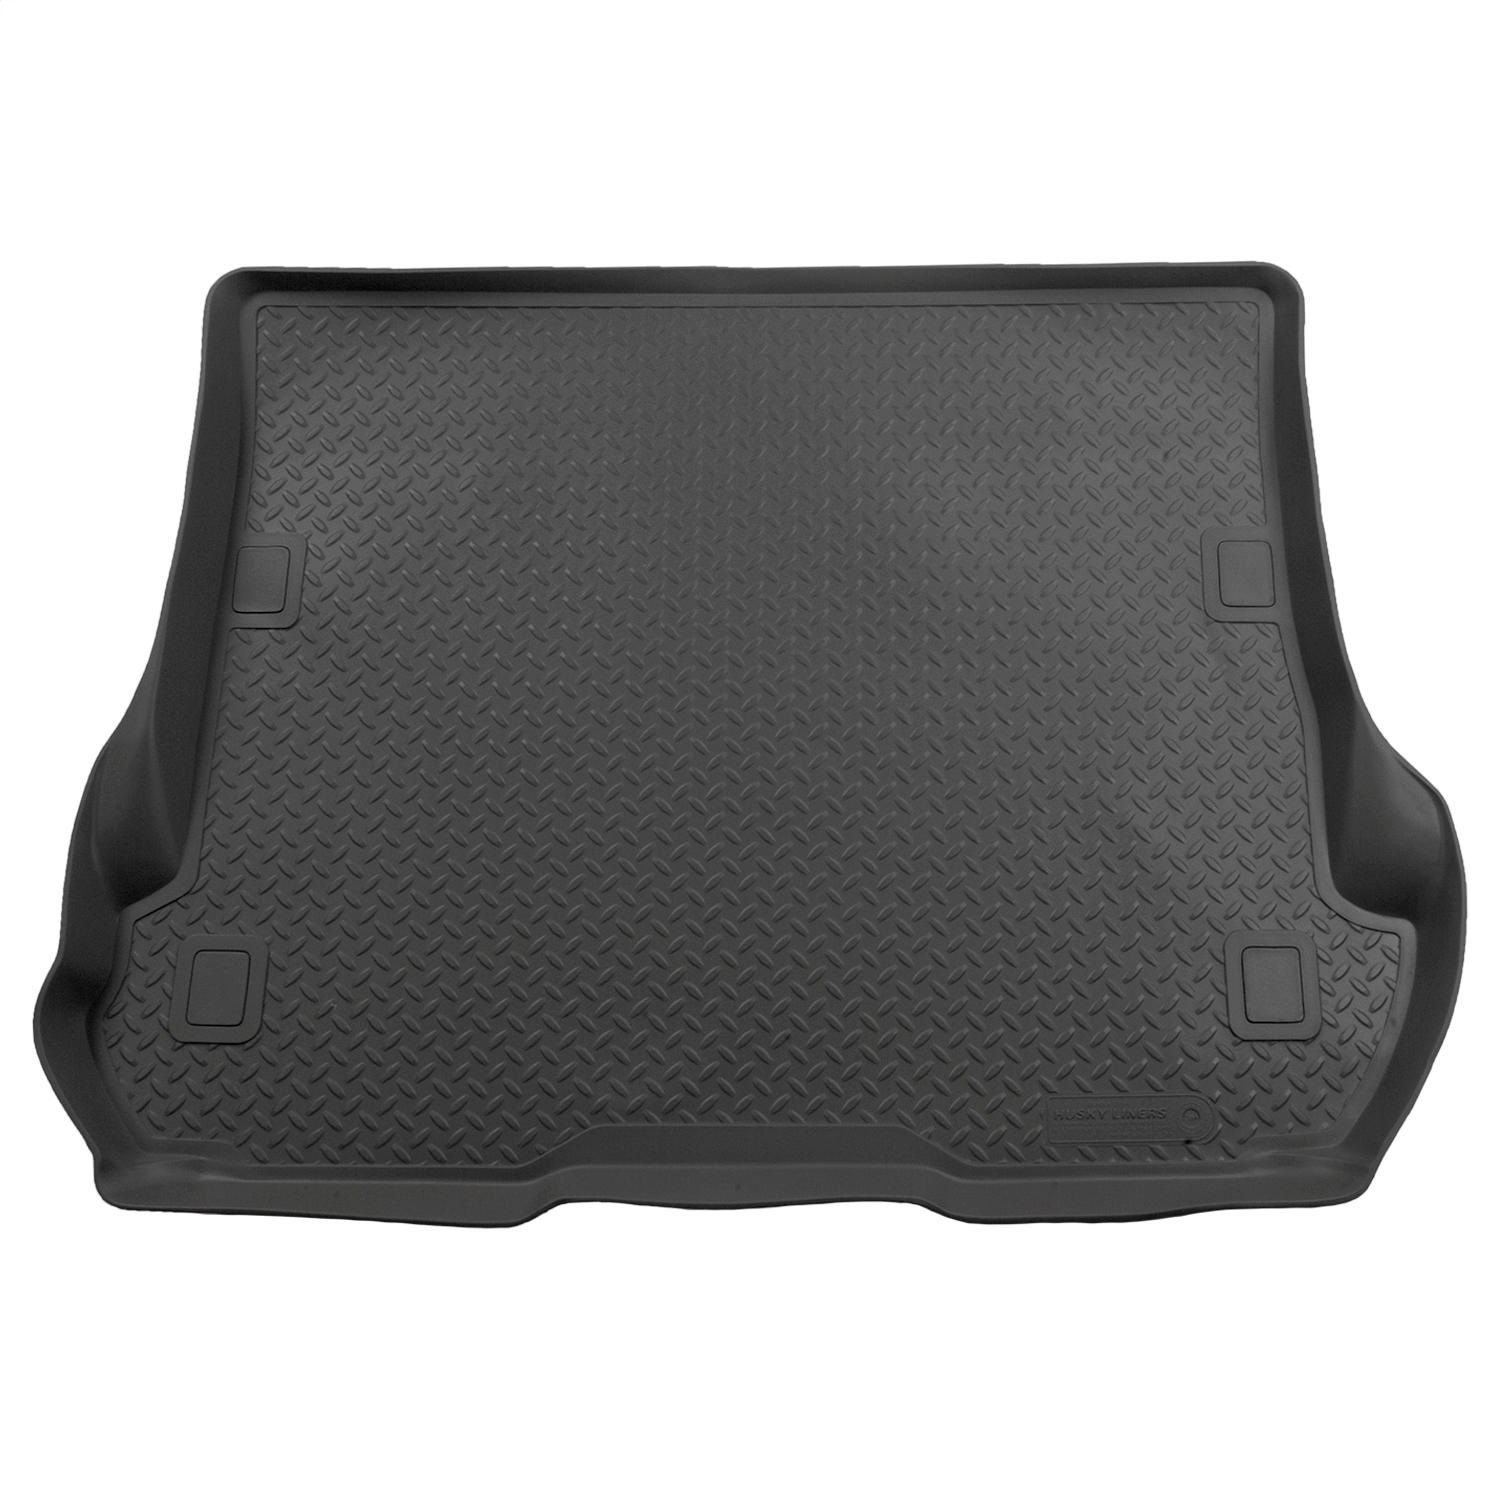 Husky Liners Husky Liners 24651 Classic Style; Cargo Liner Fits 07-11 CR-V